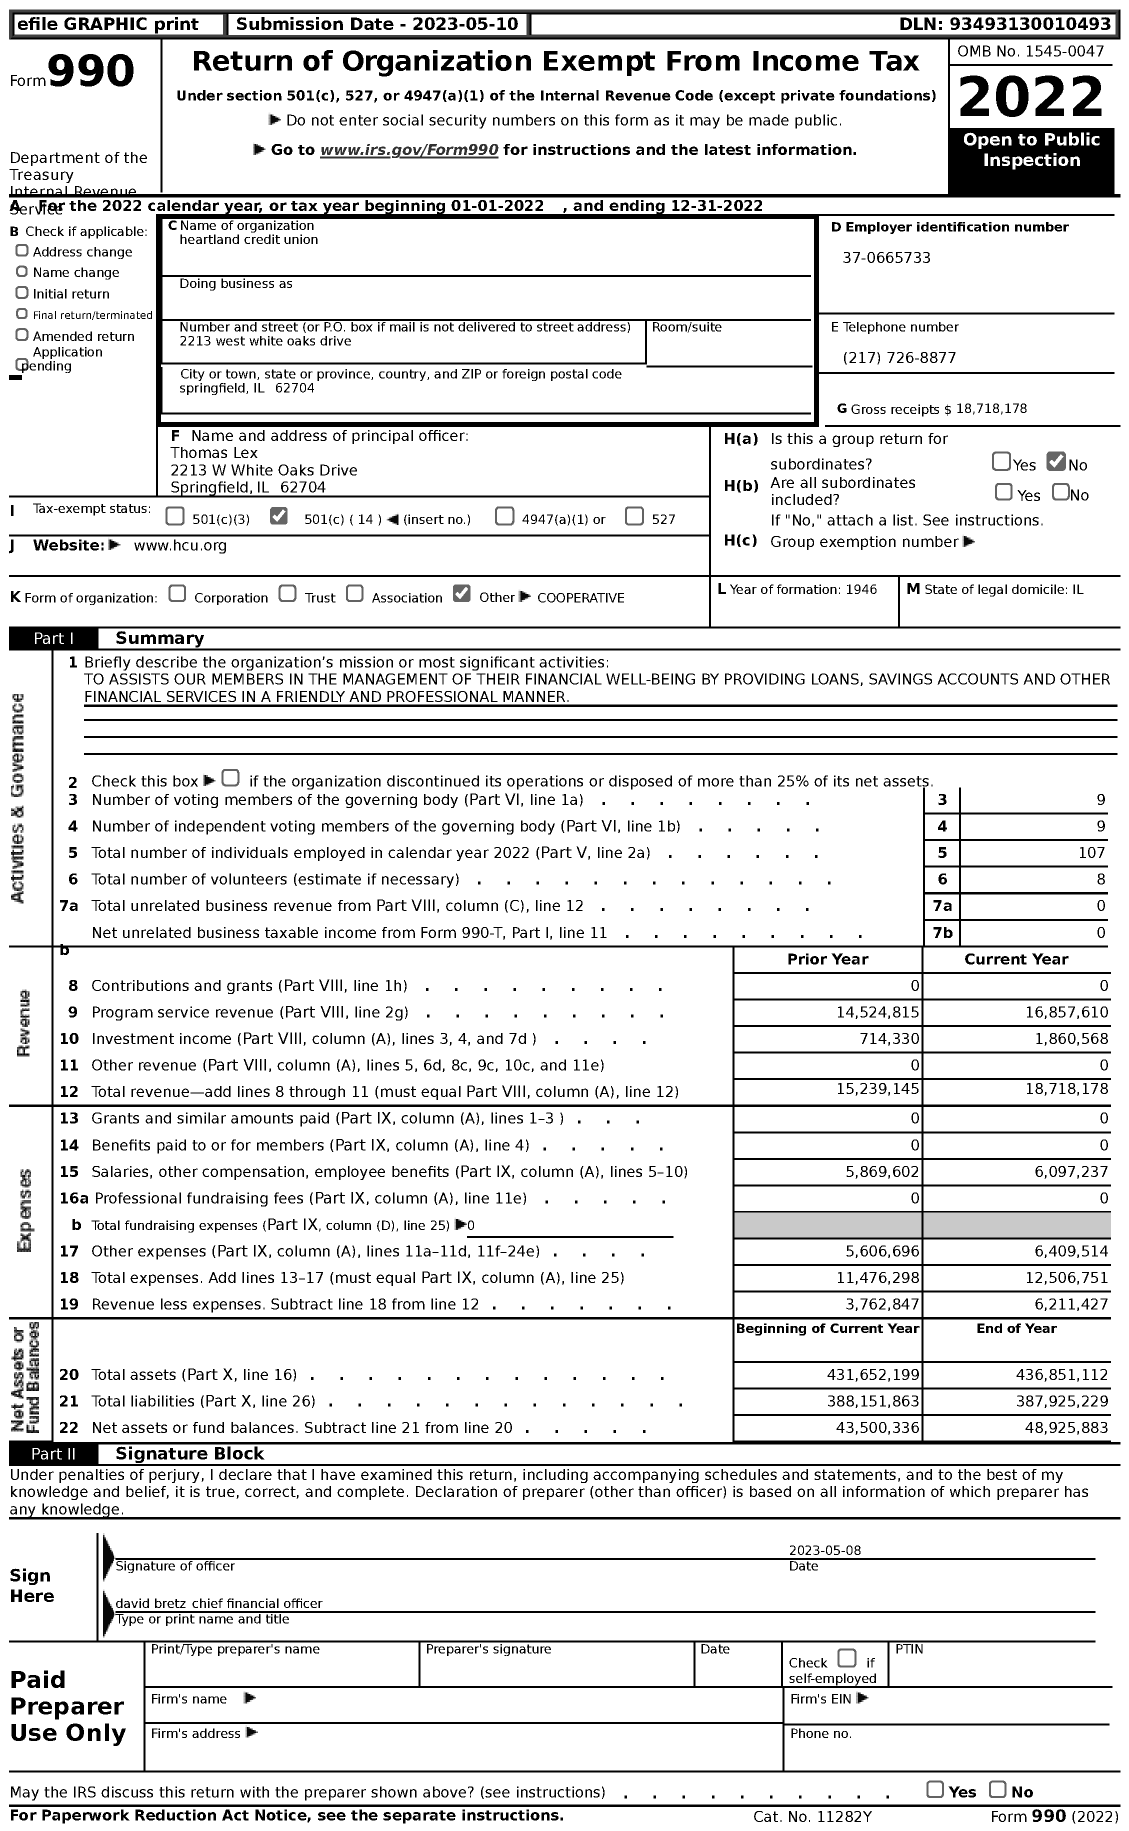 Image of first page of 2022 Form 990 for heartland credit union